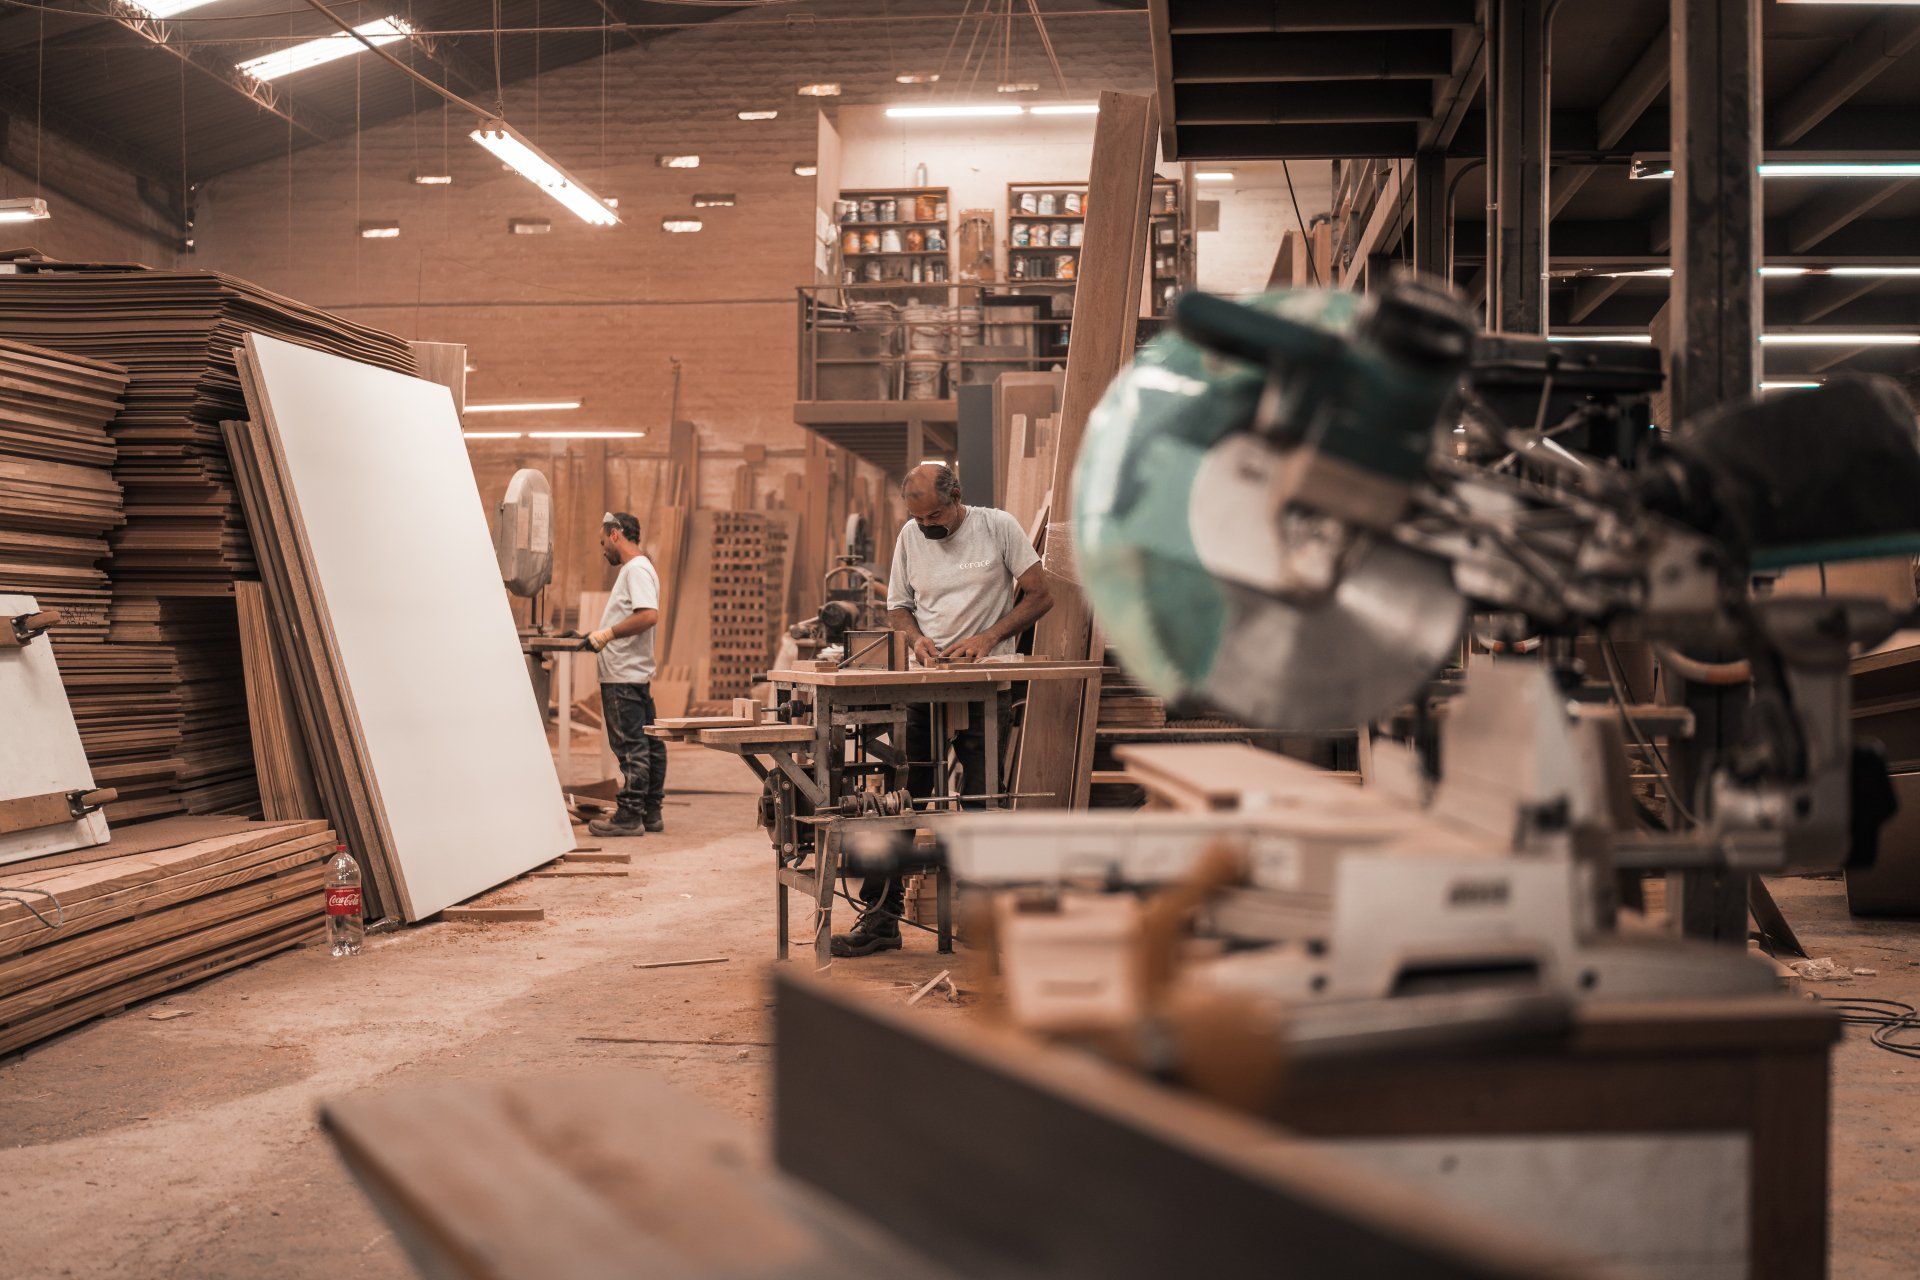 A skilled carpenter working diligently at a woodworking station, surrounded by neatly stacked plywood sheets and an array of essential woodworking tools and equipment.